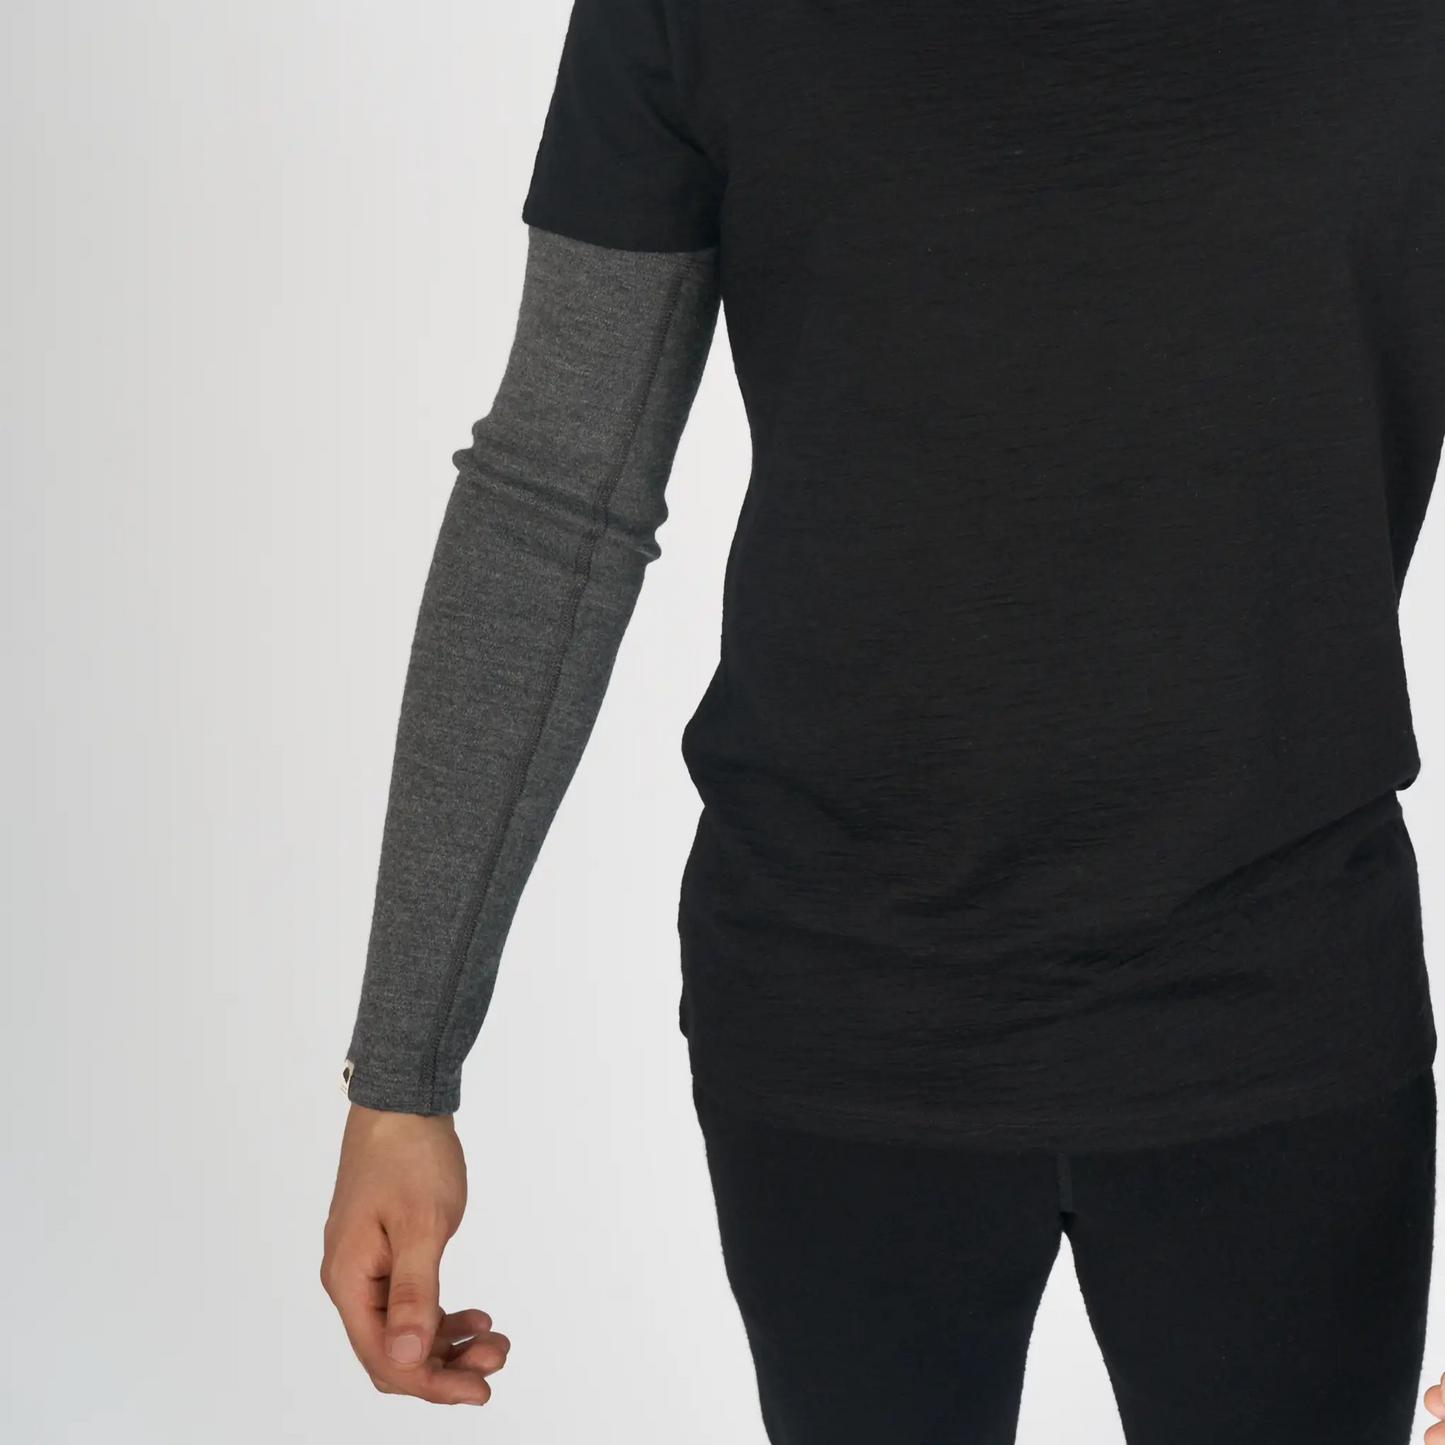 mens all natural sleeve lightweight color gray